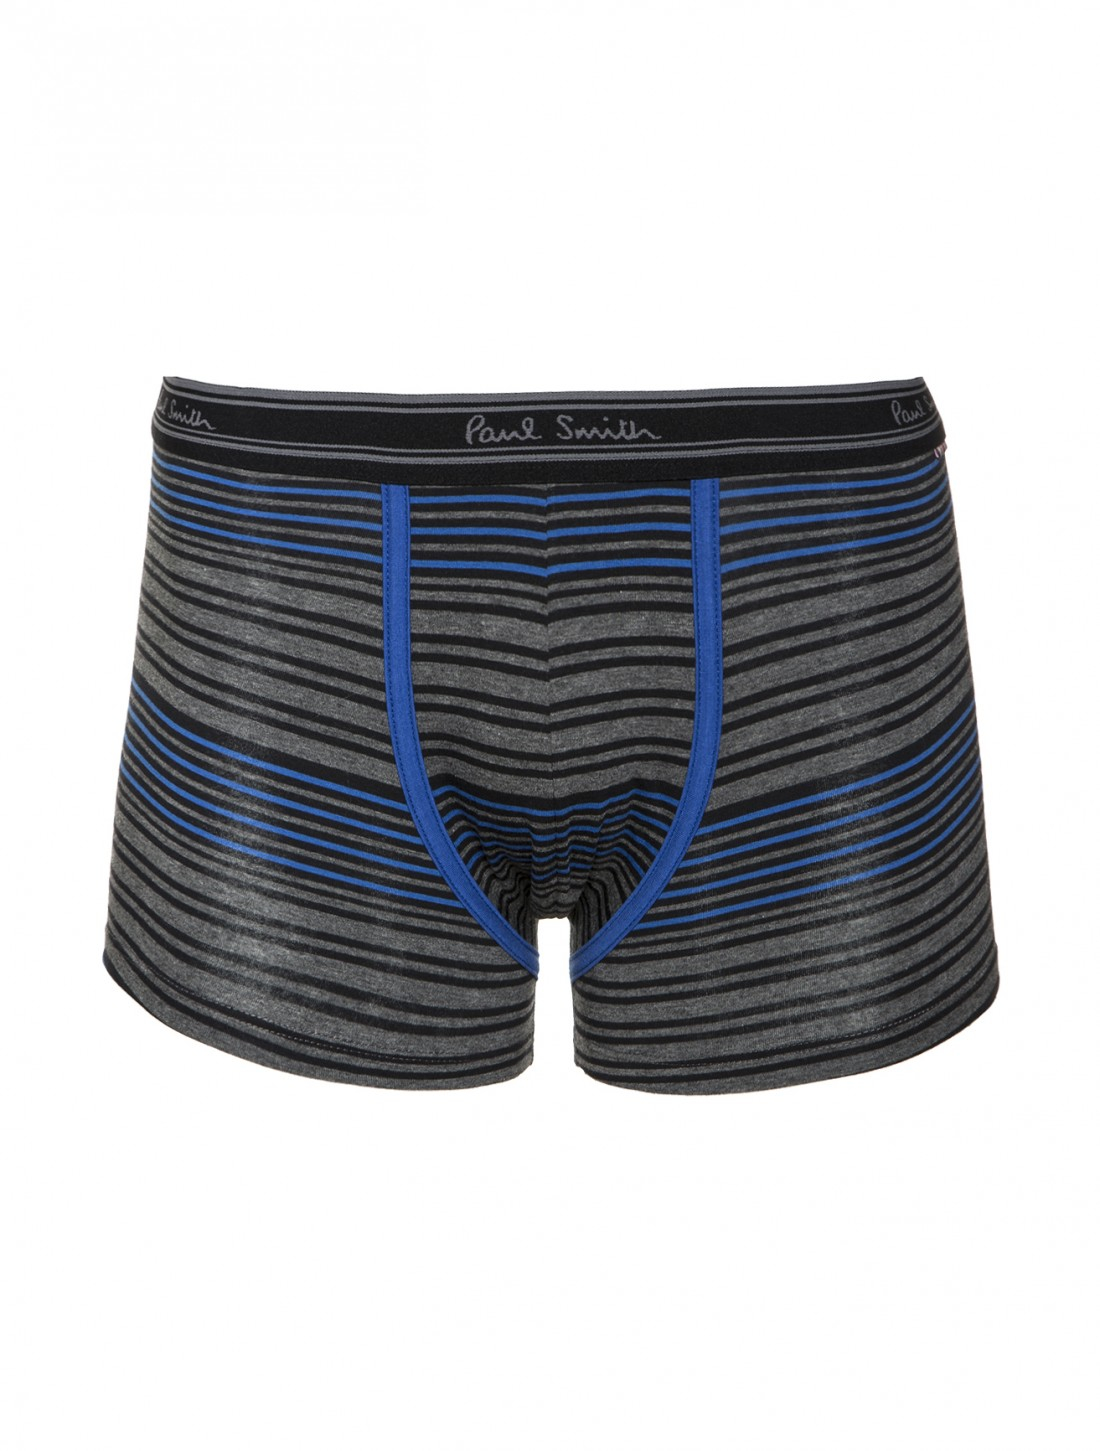 Paul smith Striped Boxer Briefs in Blue for Men (GREY) | Lyst